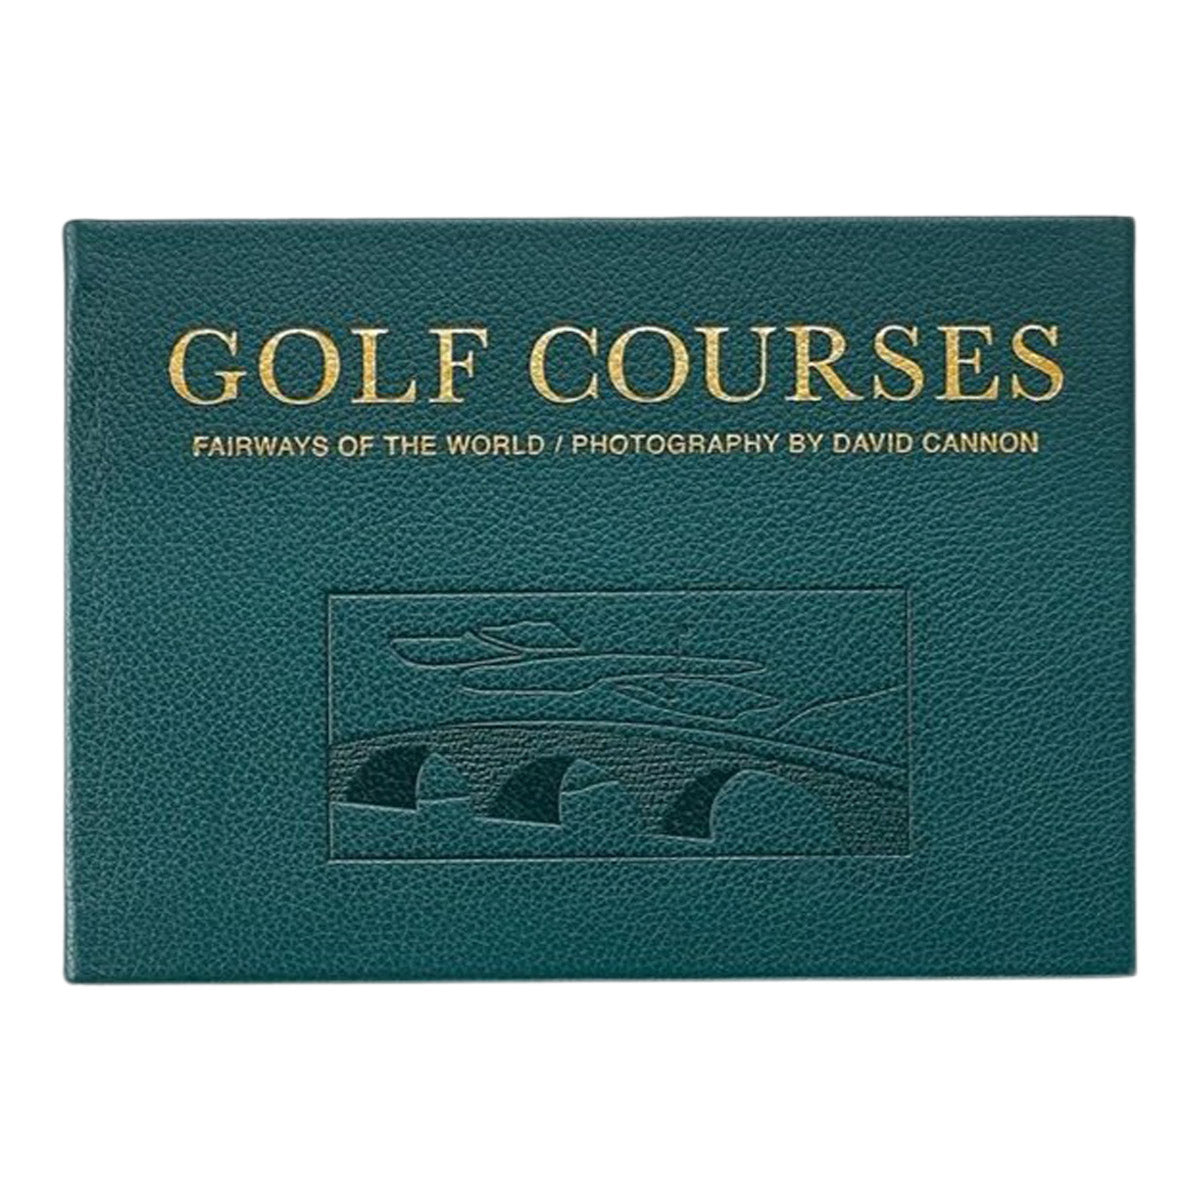 Golf Courses: Fairways of the World Traditional Leather